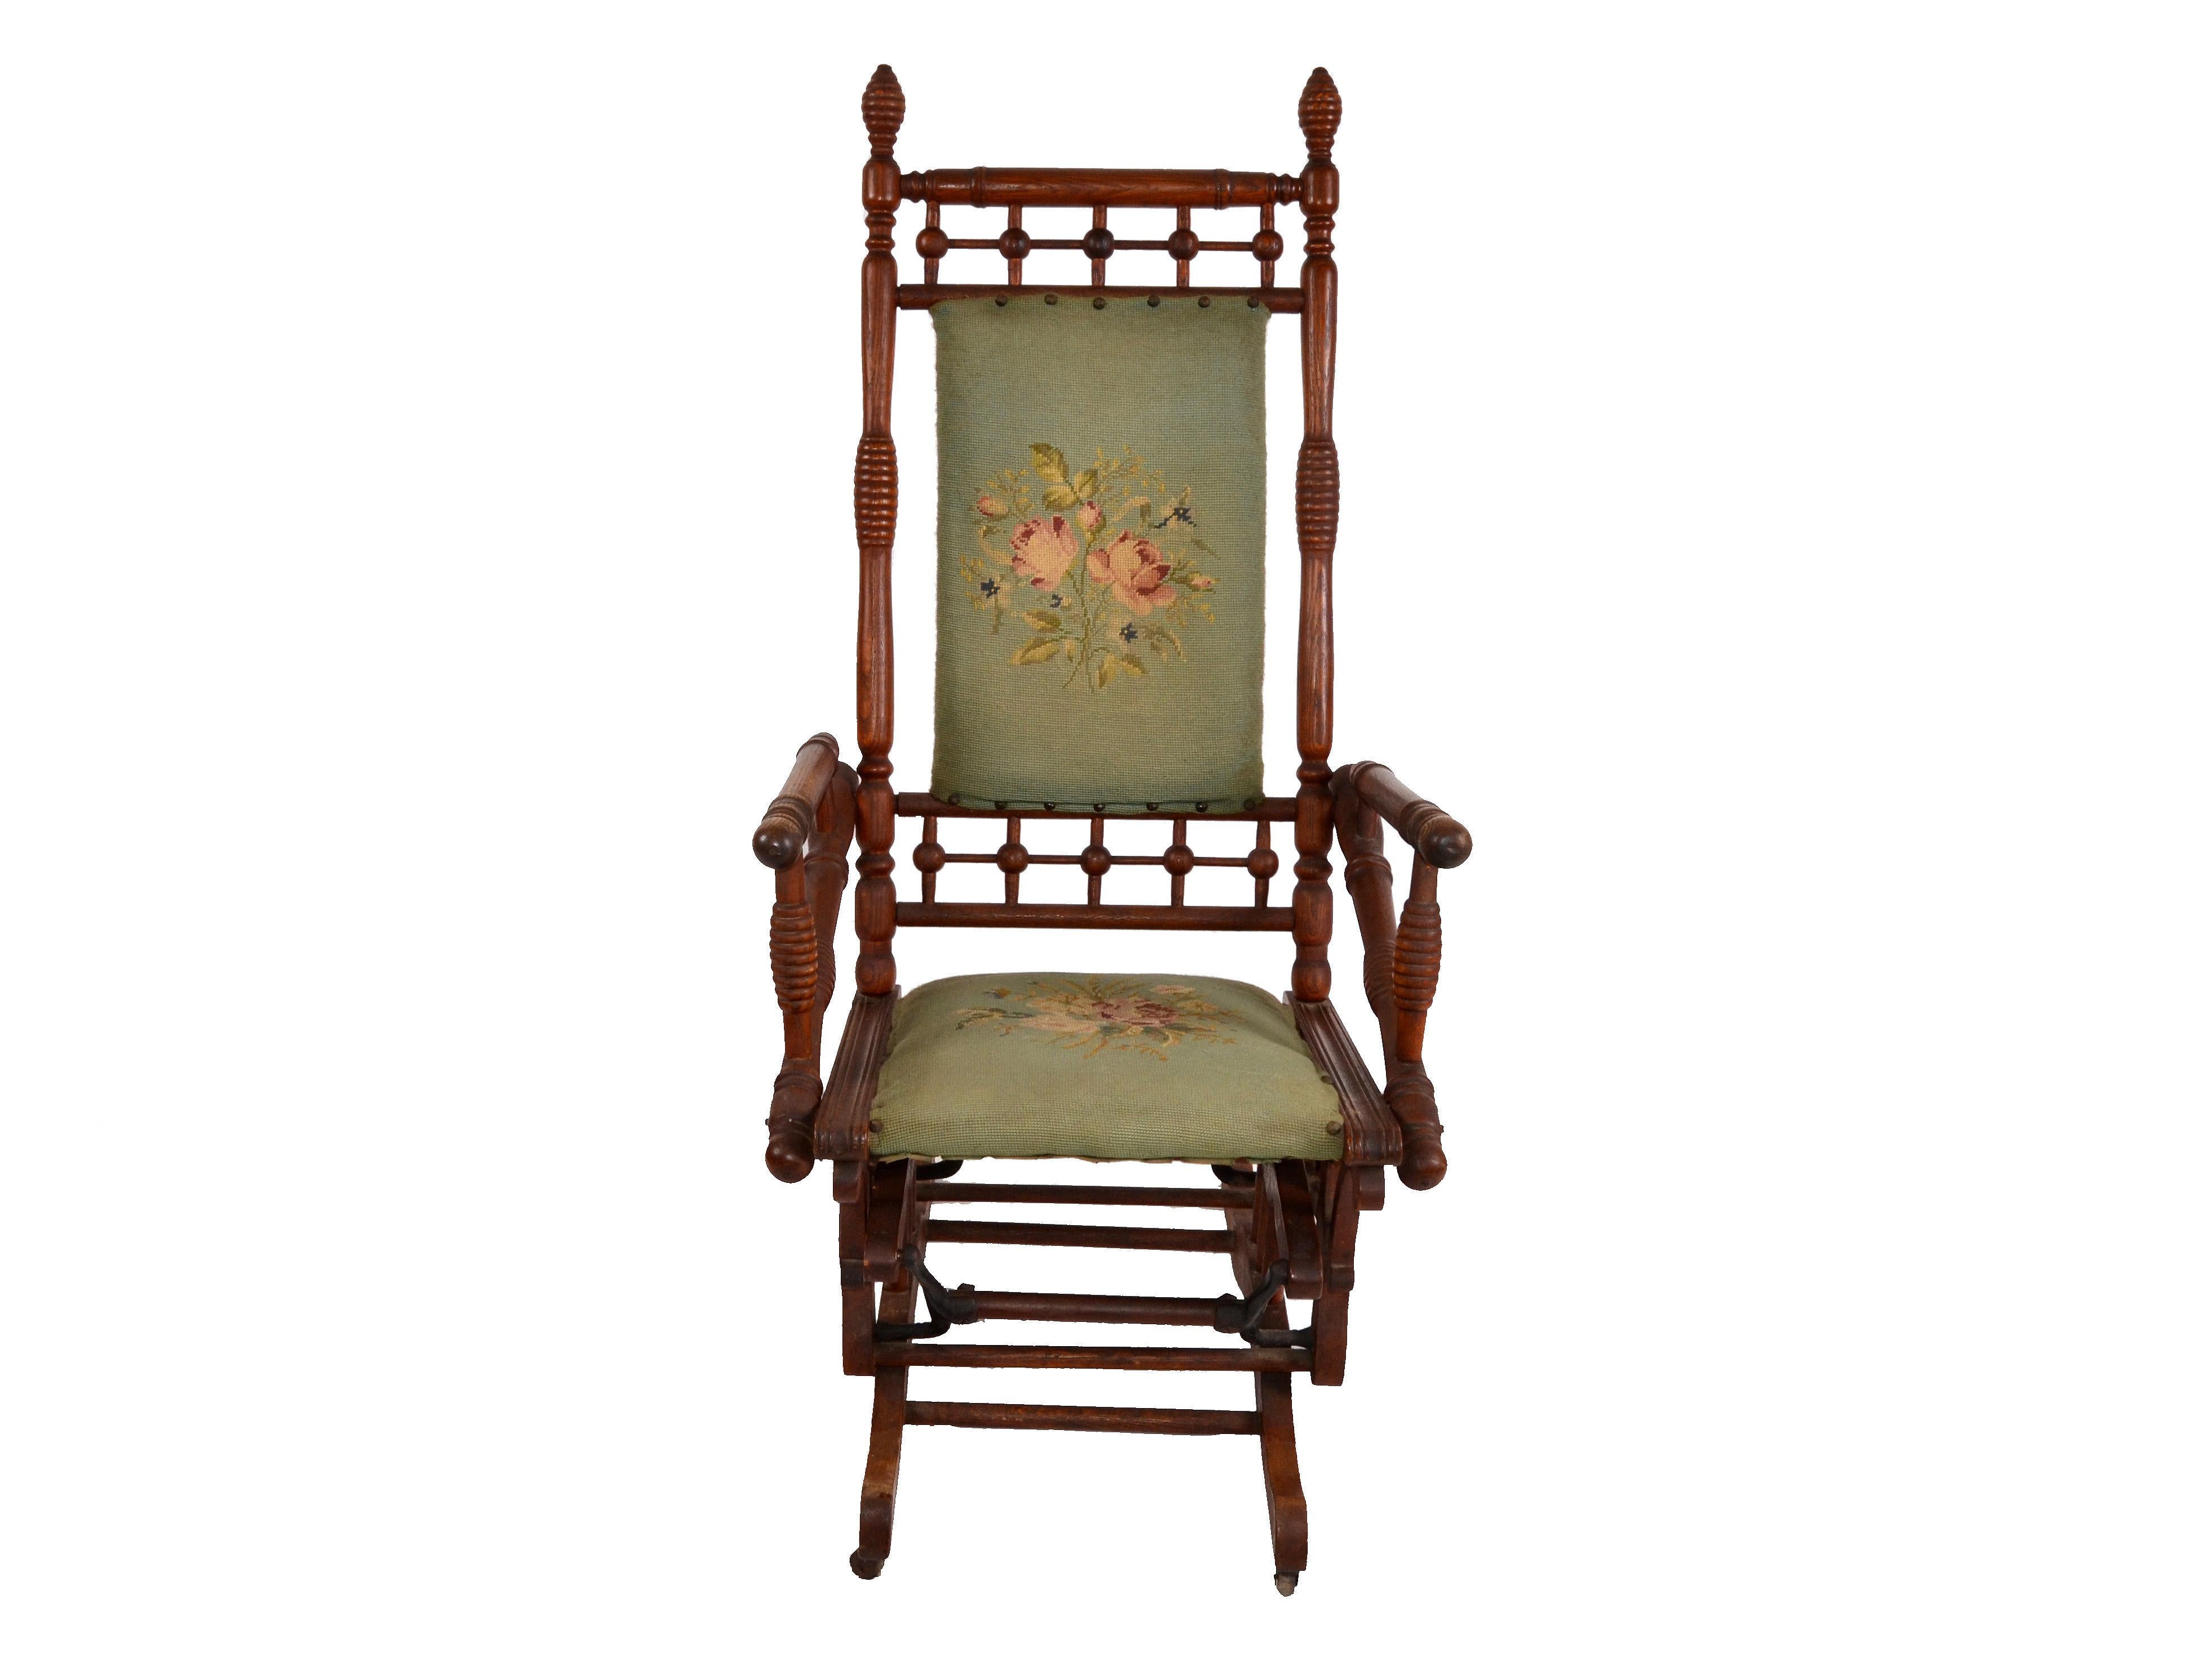 Rocking chair from the late 19th century, hand carved with turned wood details on 2 casters.
Sturdy and comfortable crafted frame with decorative rocking base.
Nailhead trim adorn the handmade needlepoint upholstered seat and chair front.
Measures: